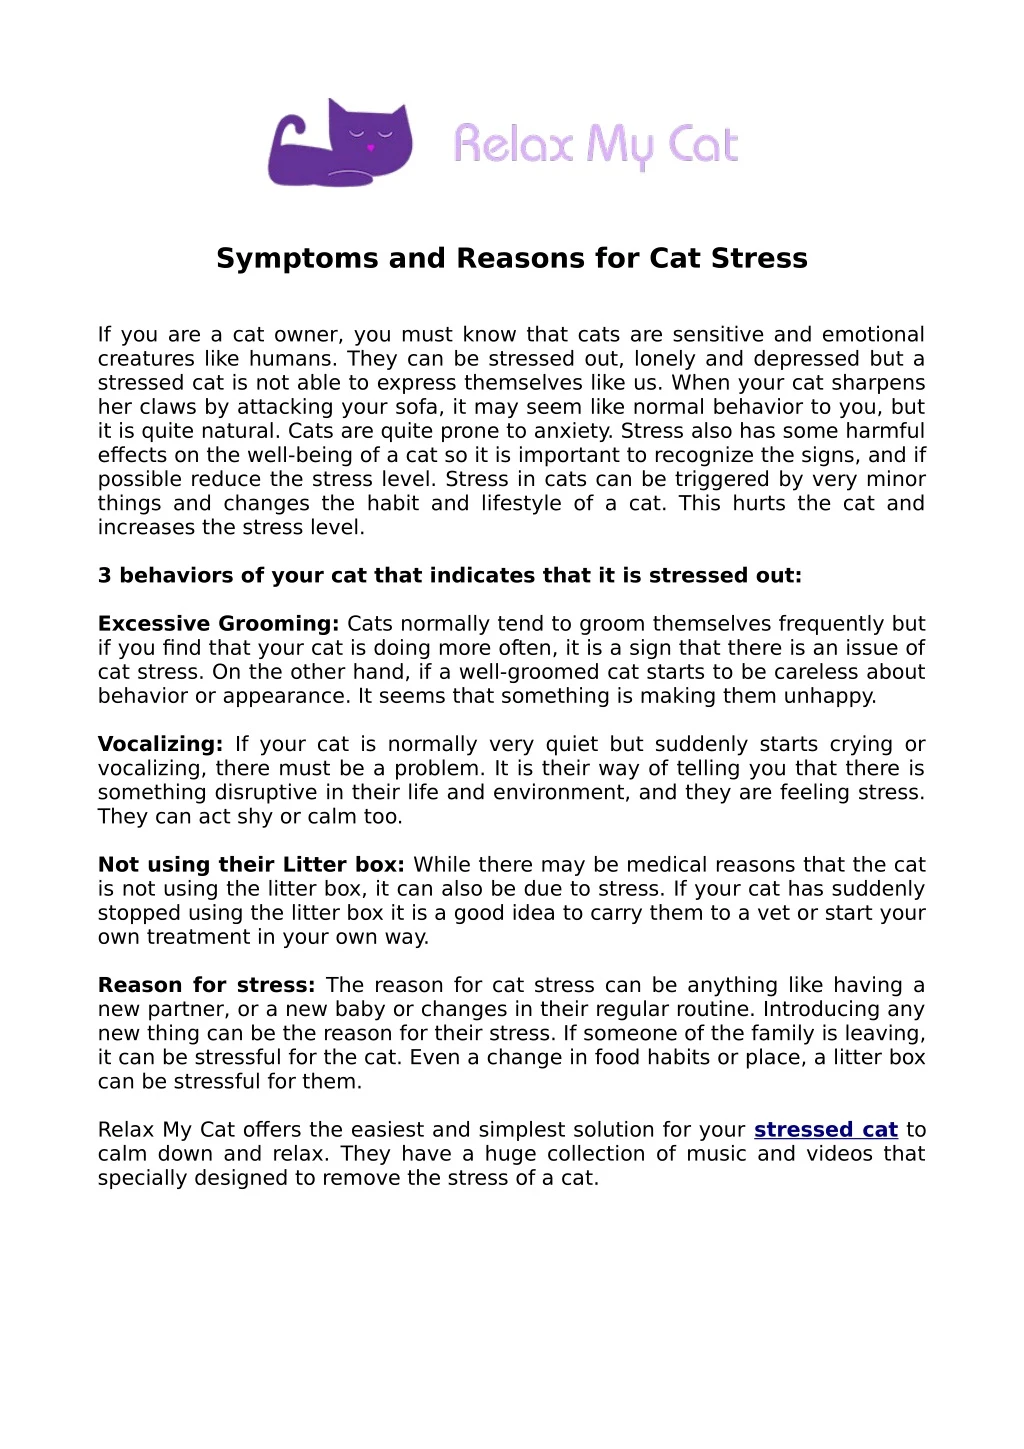 symptoms and reasons for cat stress